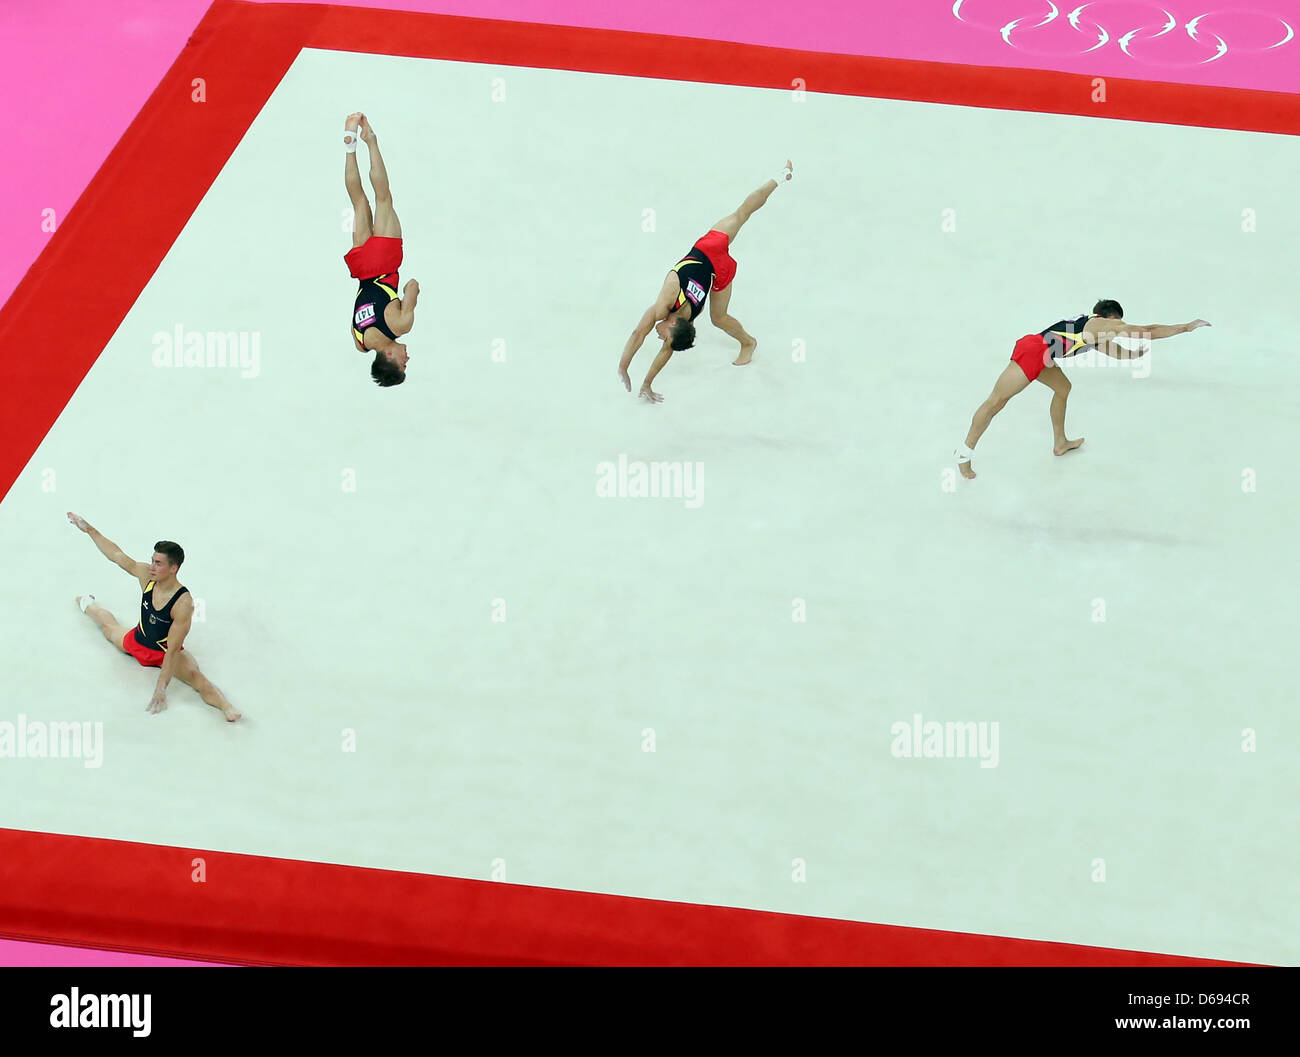 German gymnast Philipp Boy performs the floor exercises during qualification in North Greenwich Arena in London, Great Britain, 28 July 2012 - (multiple exposure). The London 2012 Olympic Games will be held in London from 27 July to 12 August 2012. Photo: Friso Gentsch dpa  +++(c) dpa - Bildfunk+++ Stock Photo